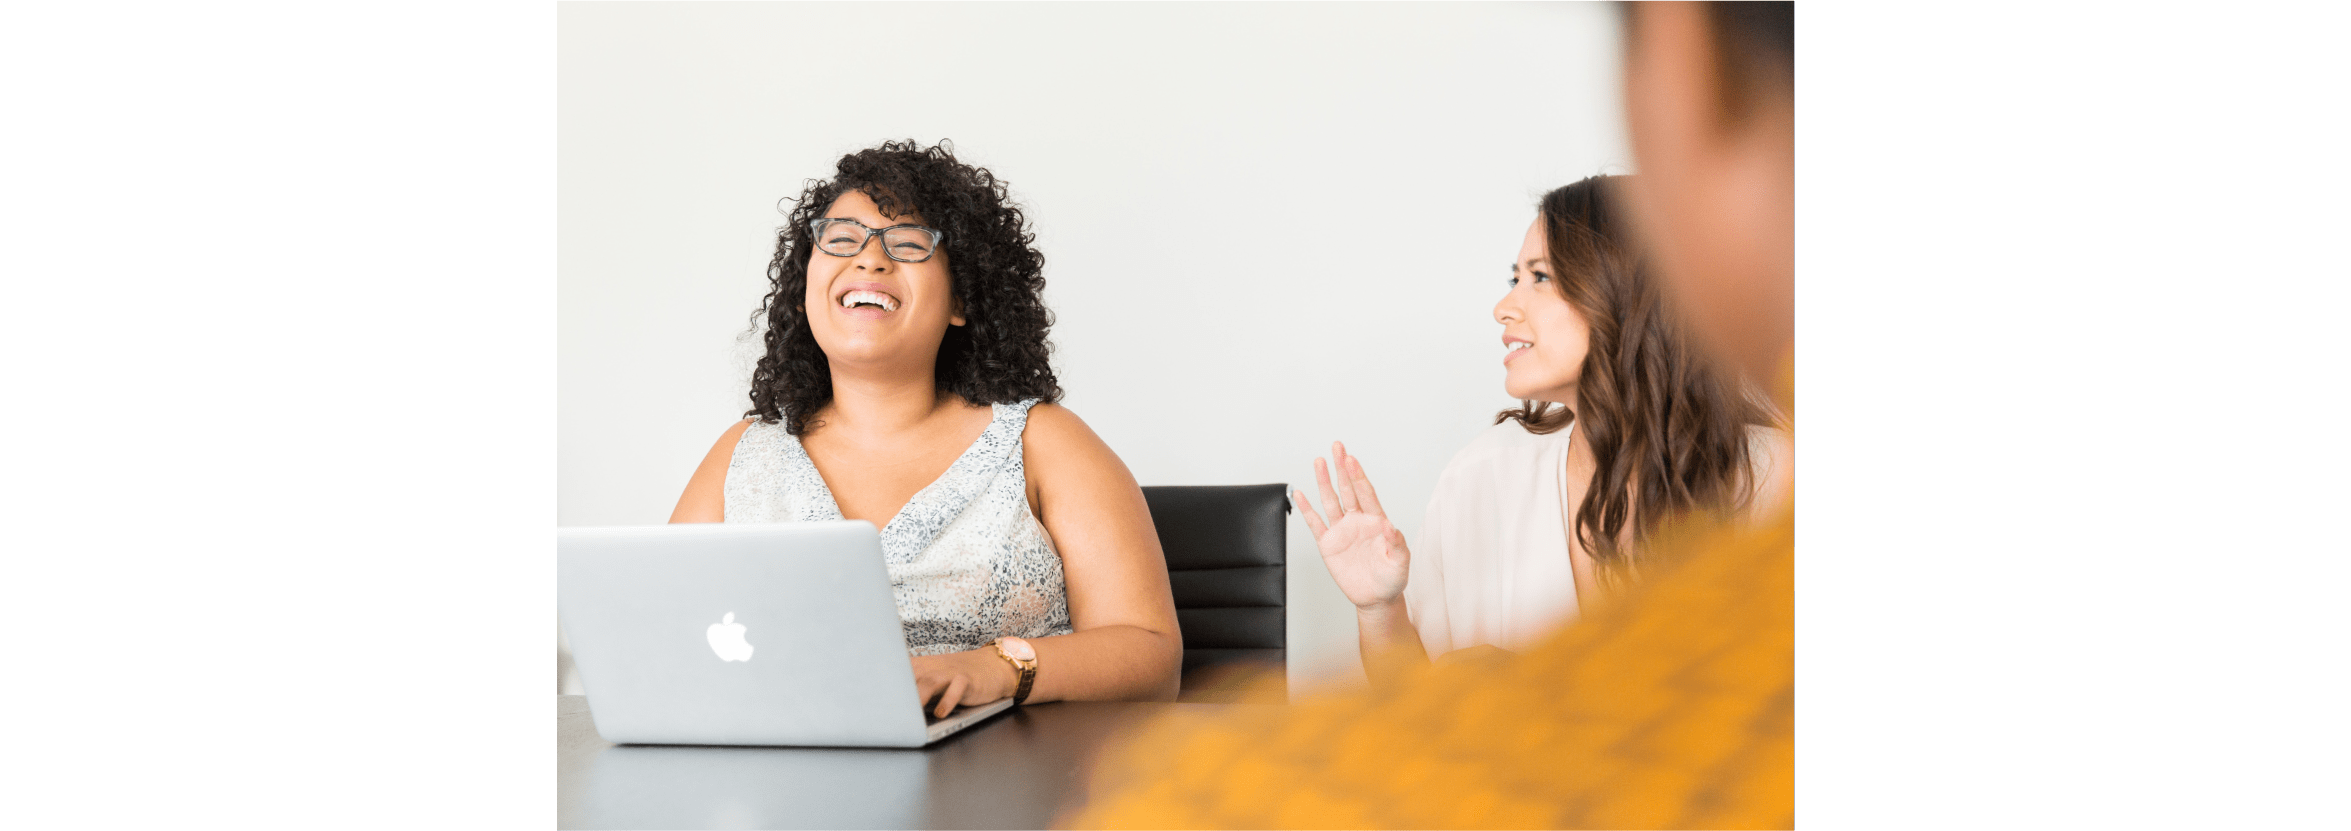 Two women share a light-hearted moment while working at a laptop.